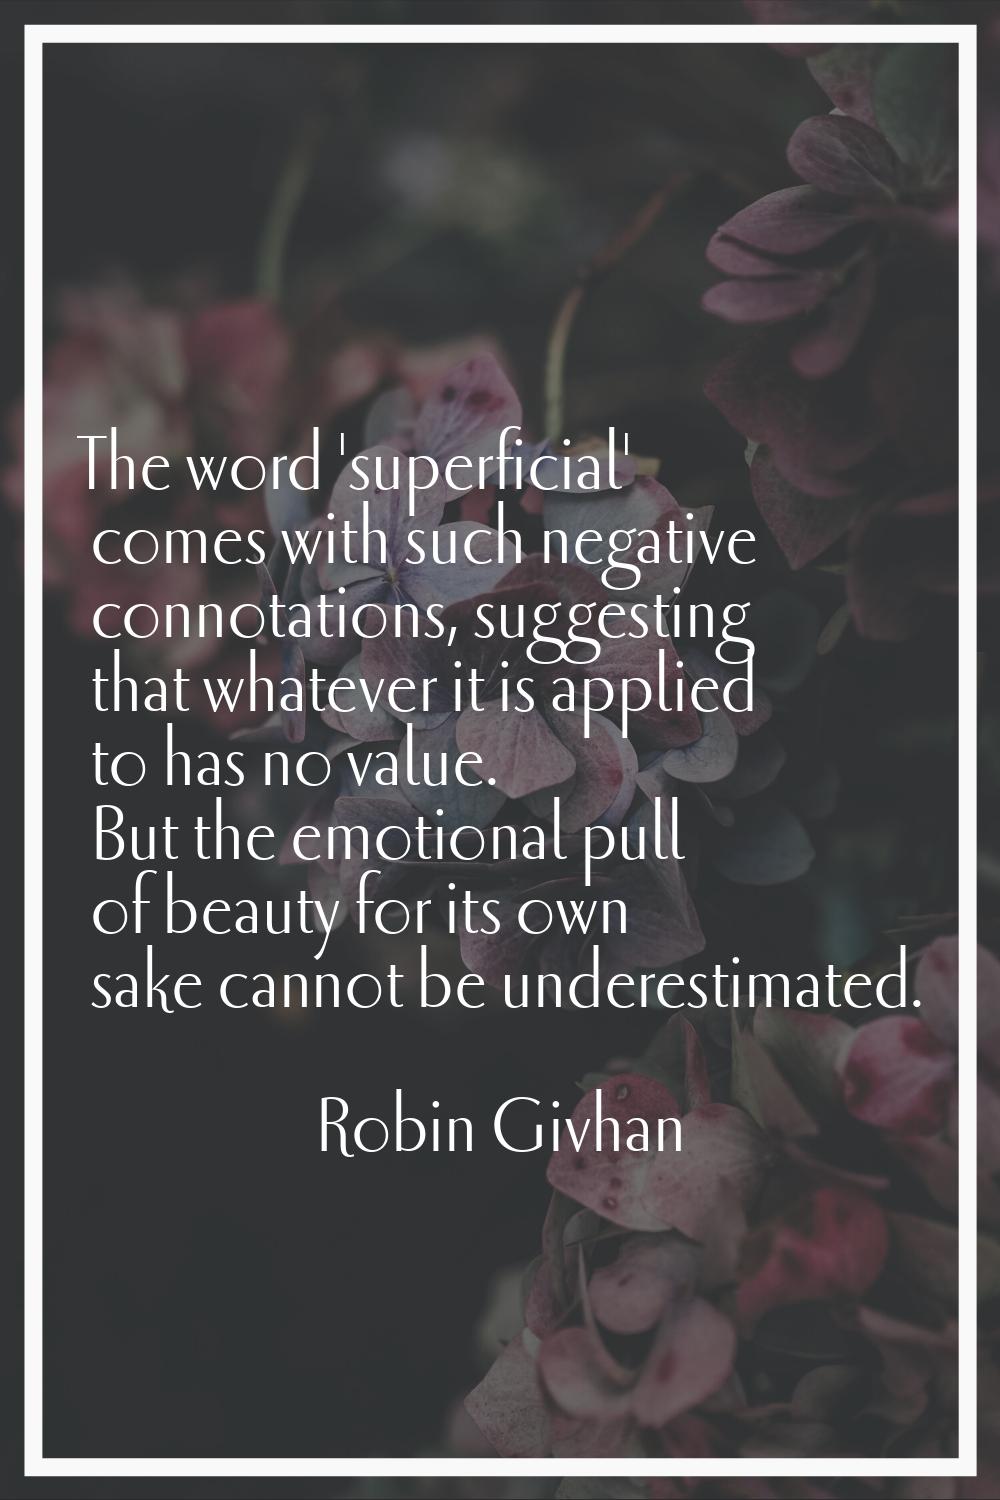 The word 'superficial' comes with such negative connotations, suggesting that whatever it is applie